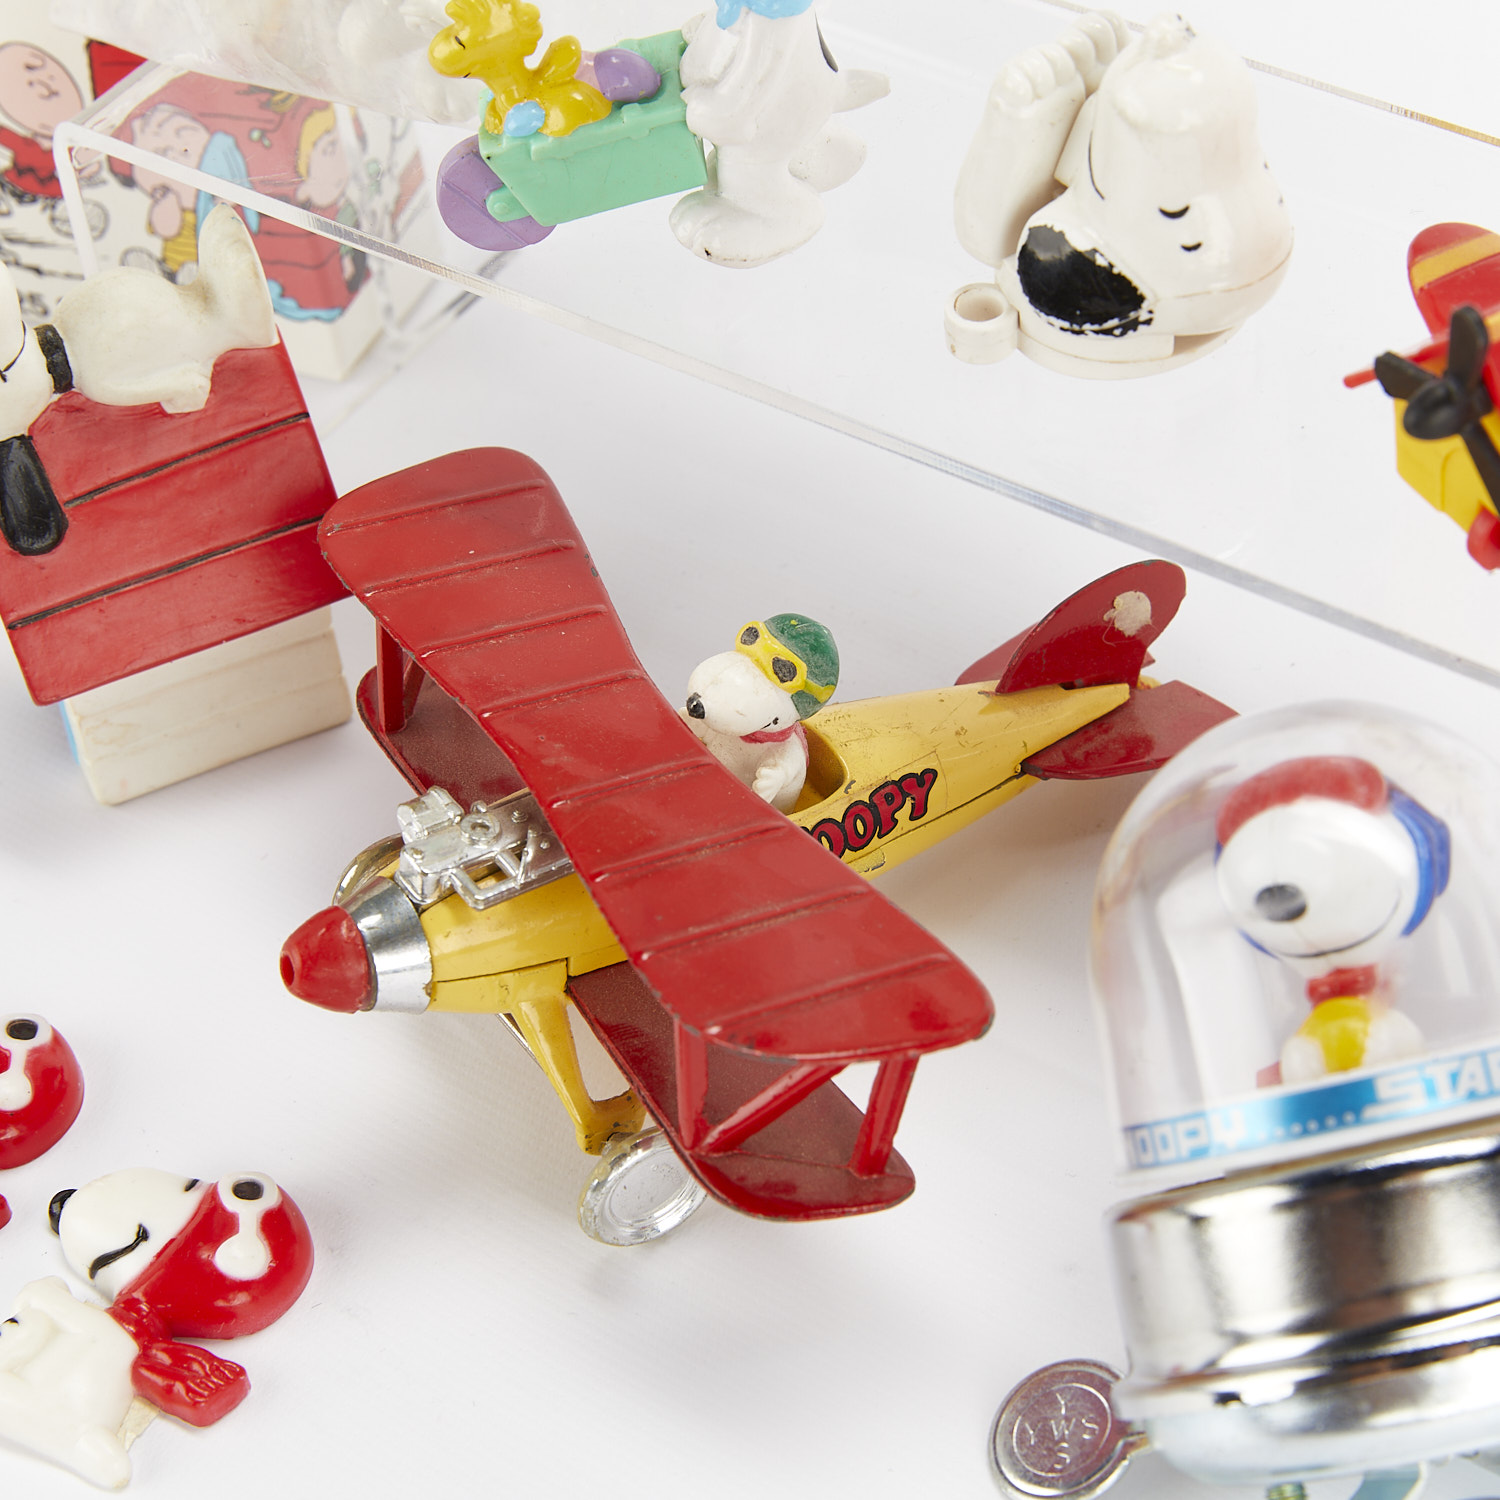 Group of 16 Snoopy Figurines and Bandages - Image 7 of 12